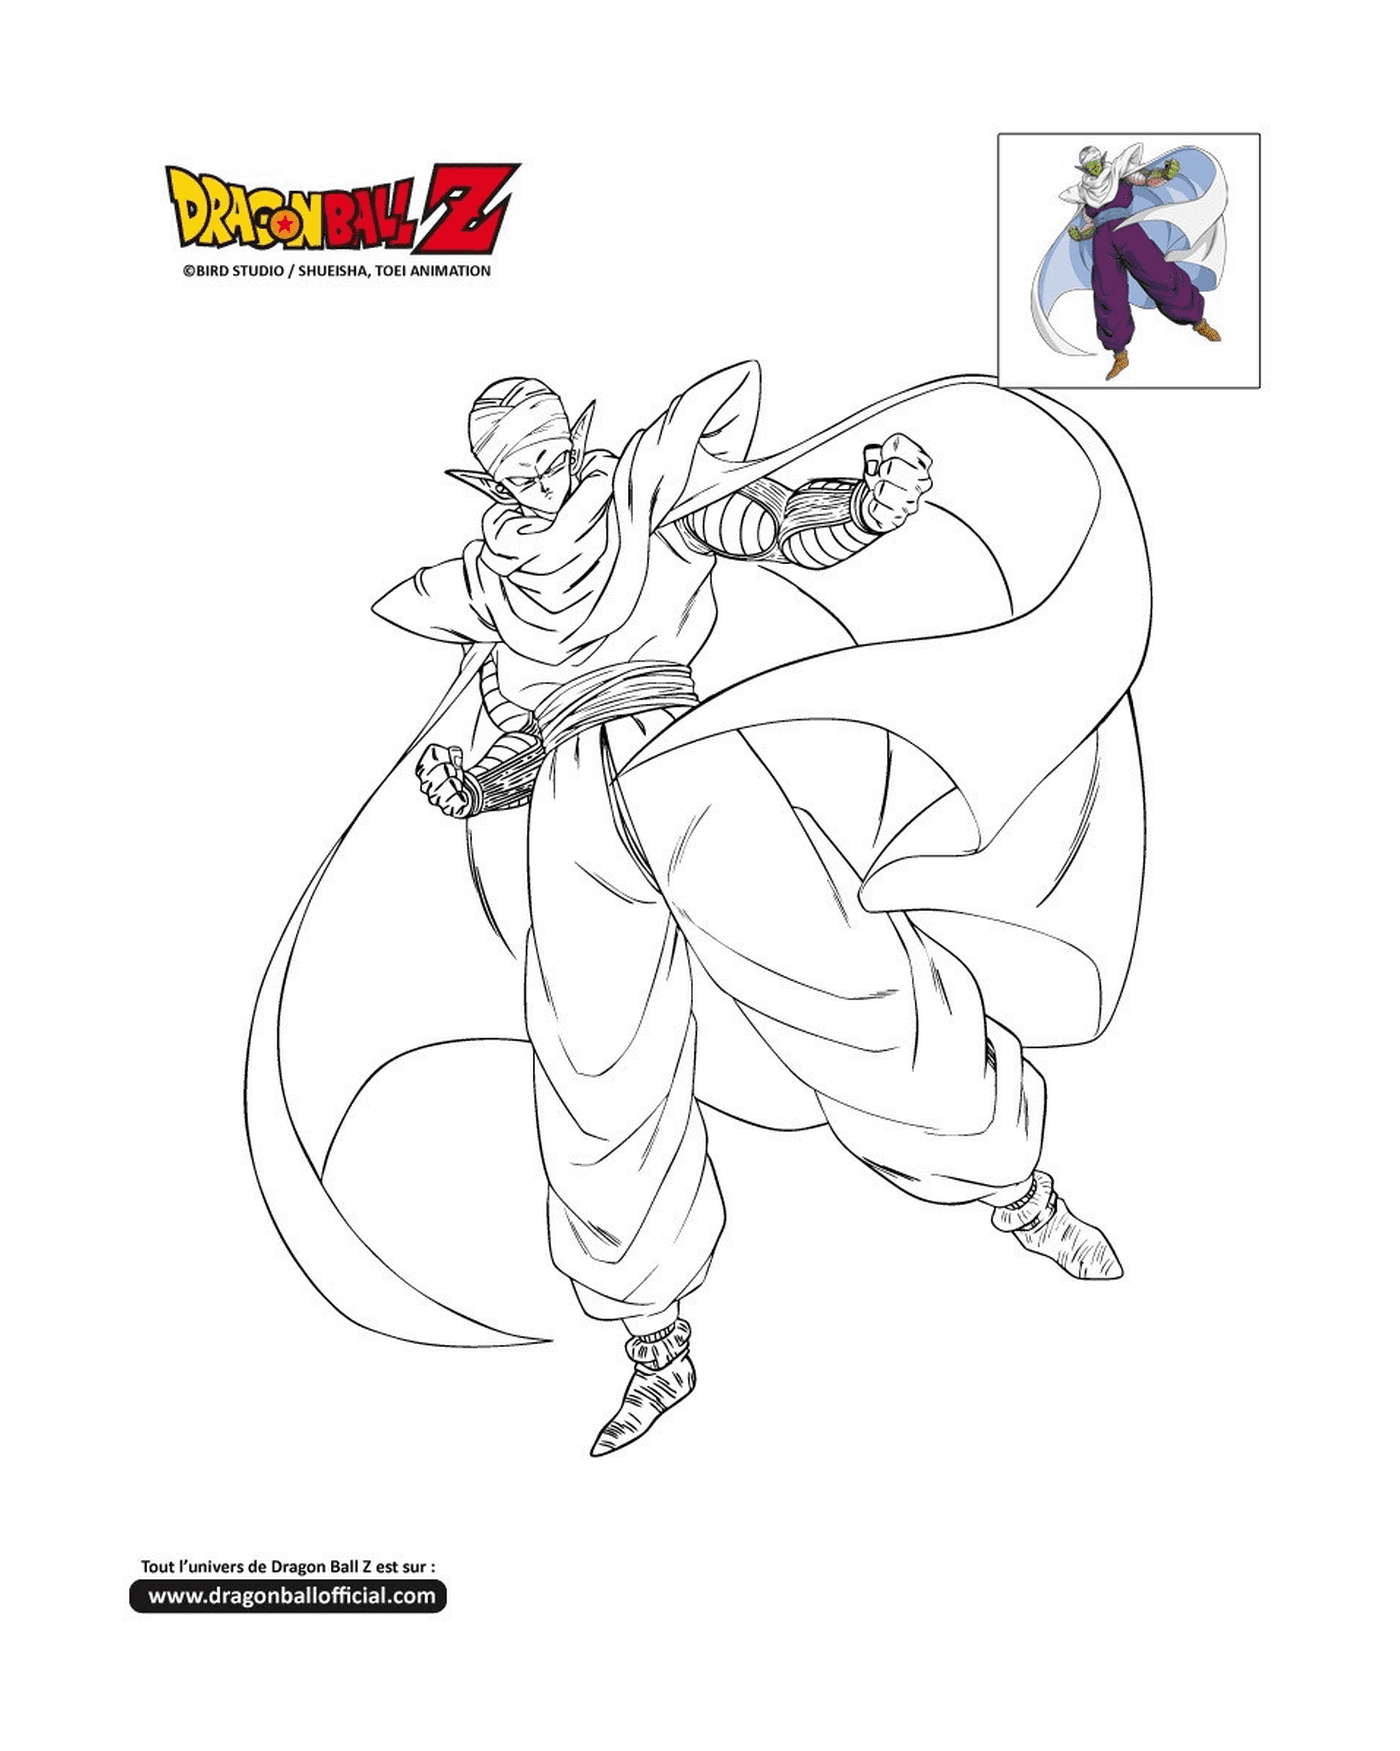  Piccolo flying in the air in Dragon Ball Z 